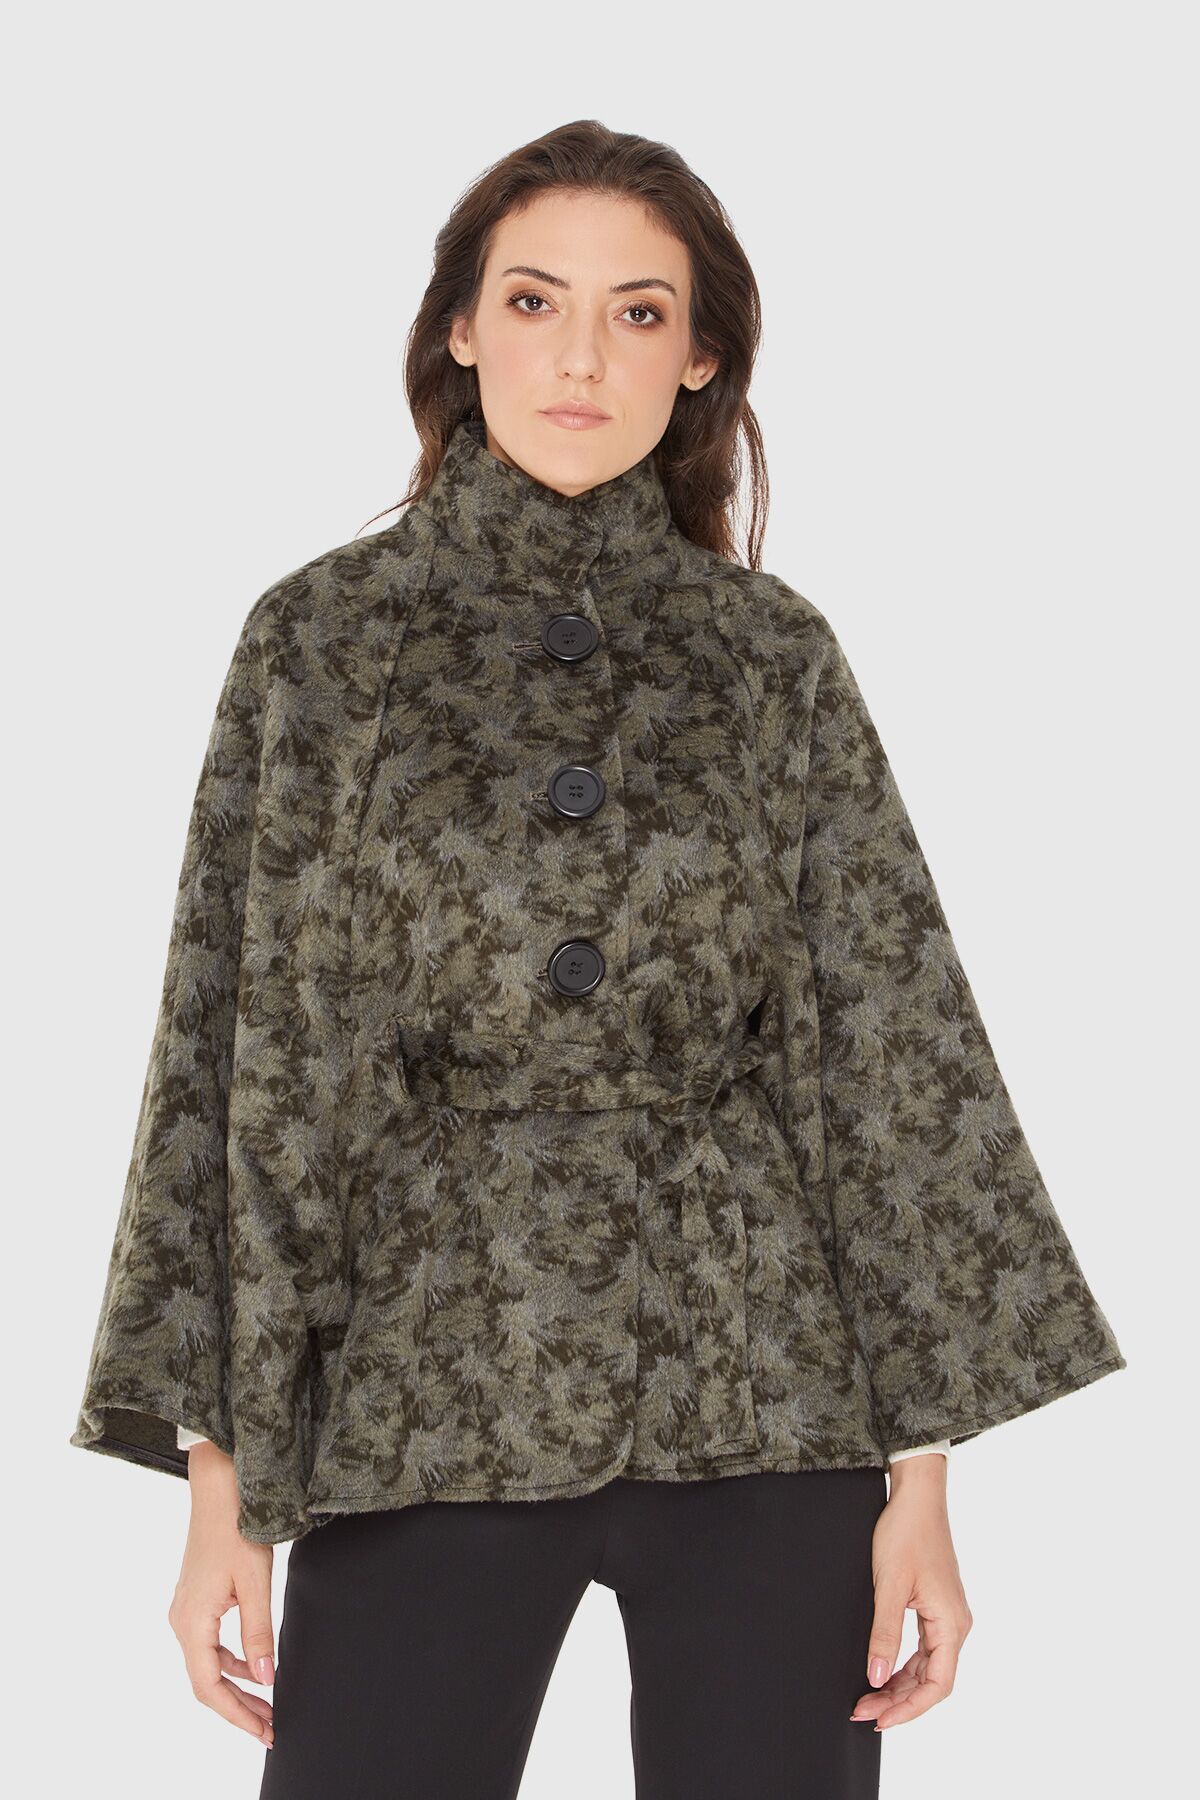 4G CLASSIC - Cashmere Textured Green Poncho